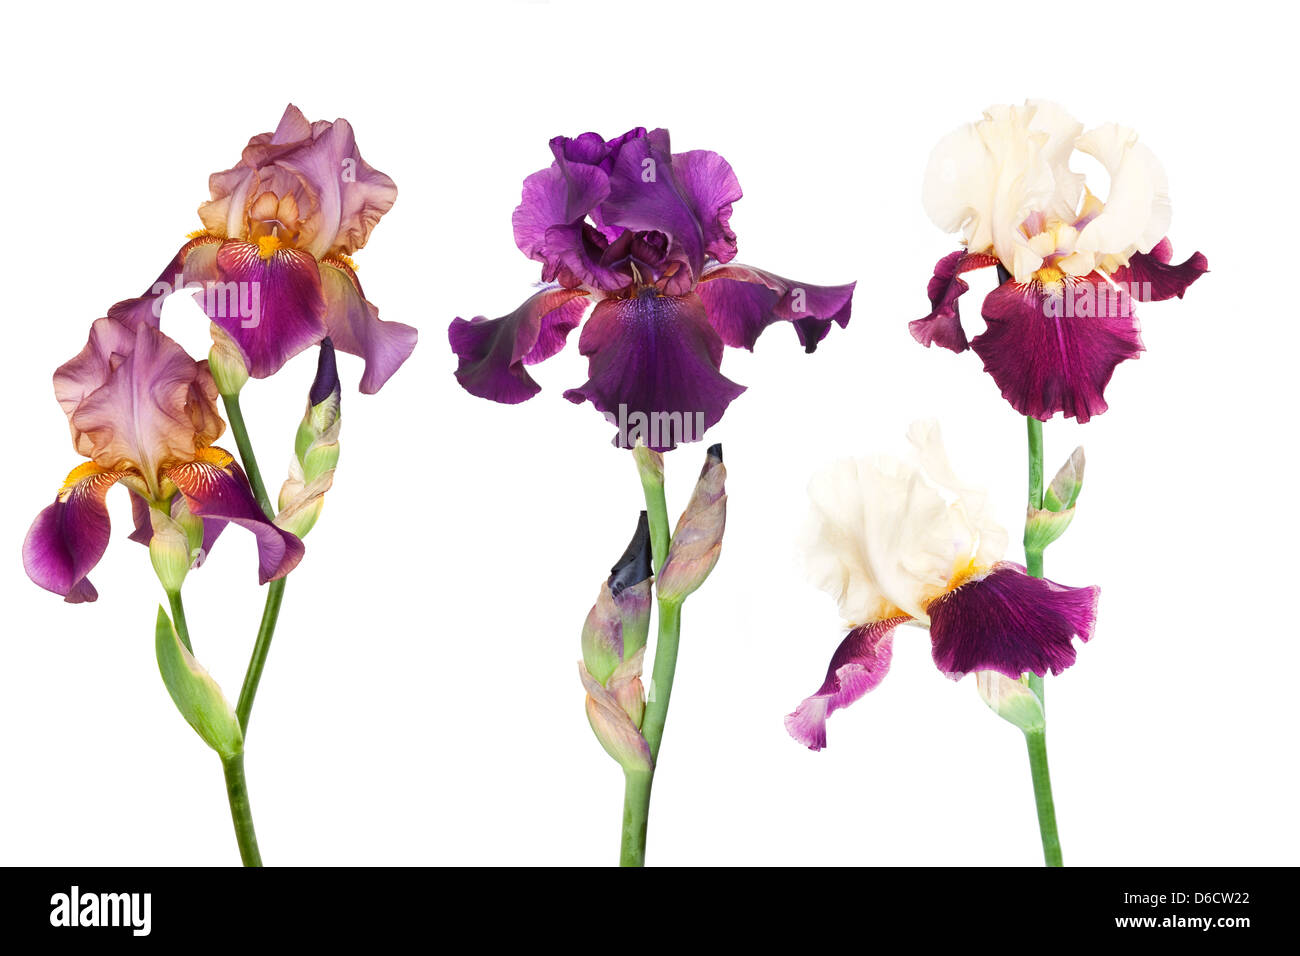 Three Irises High Resolution Stock Photography and Images   Alamy